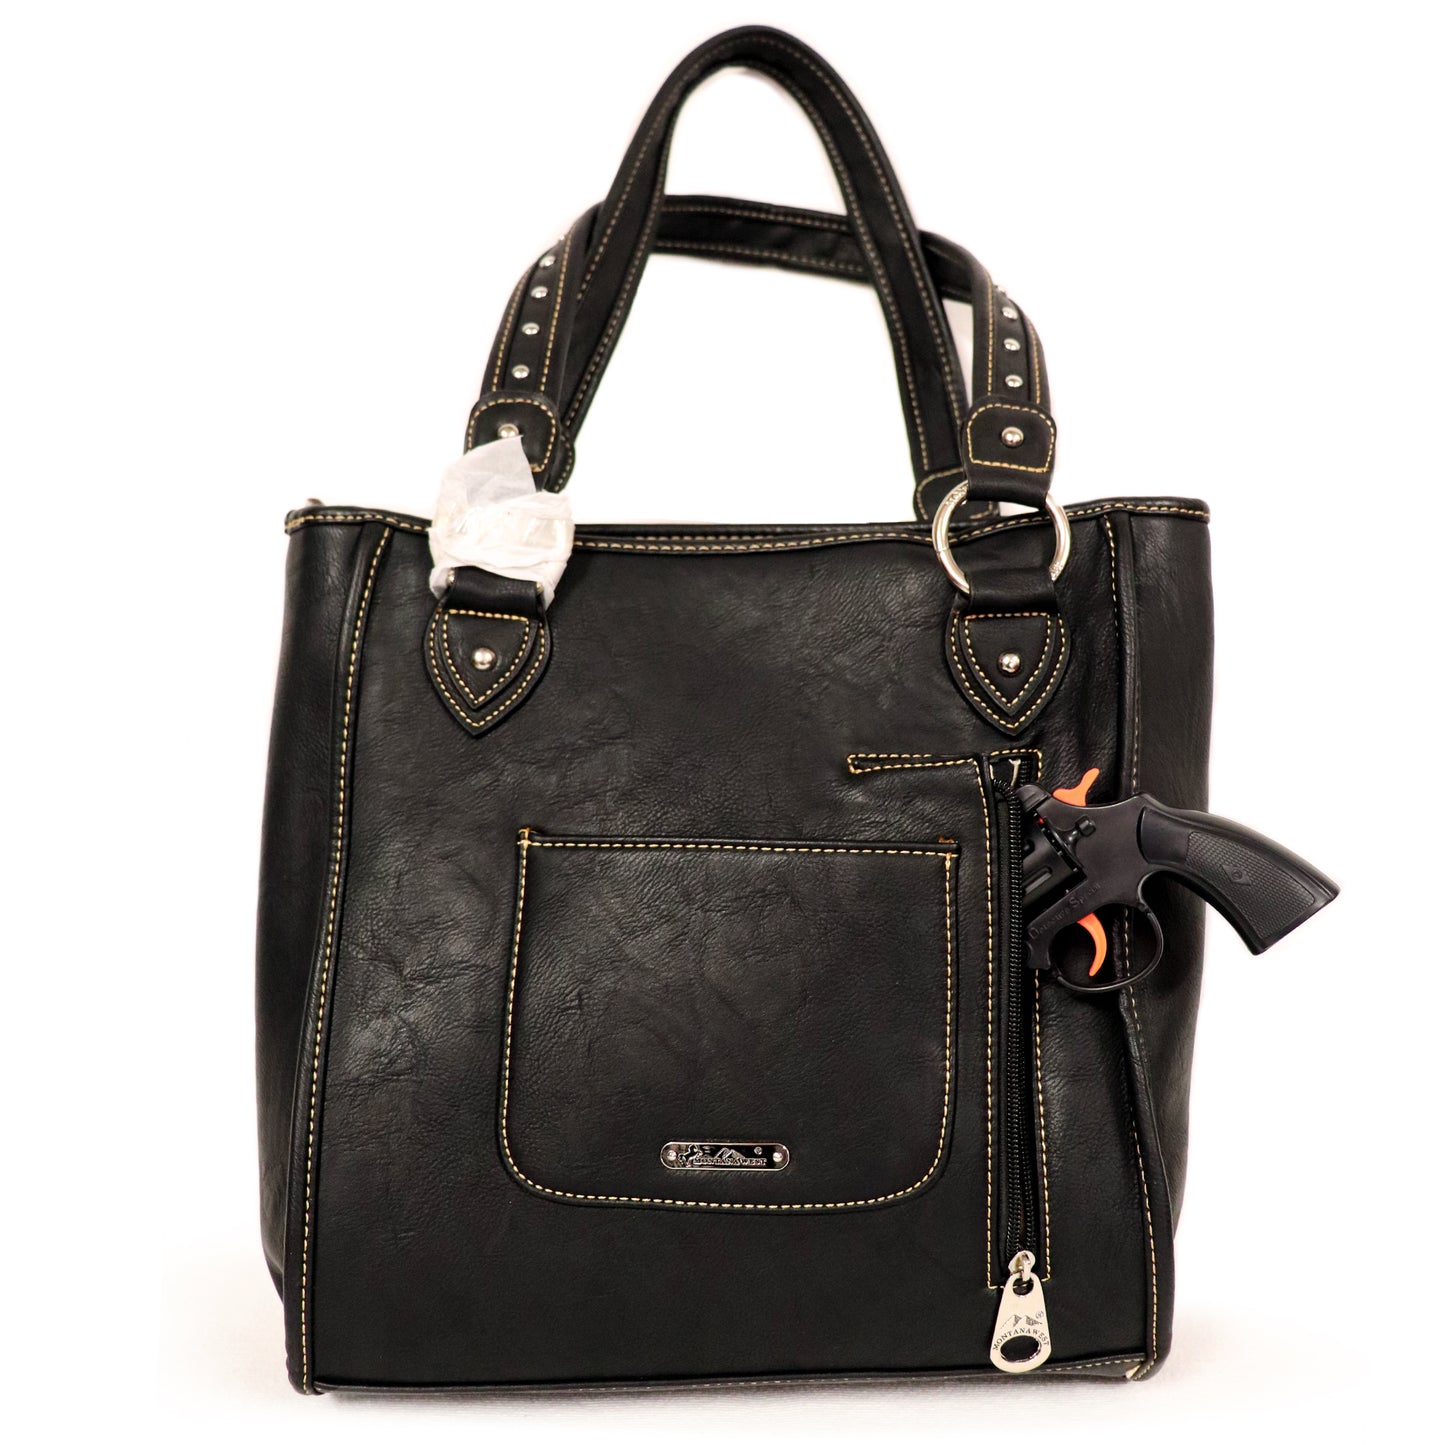 Cora Tote by Lady Conceal Bag | Concealed Carry for Women –  www.itsinthebagboutique.com